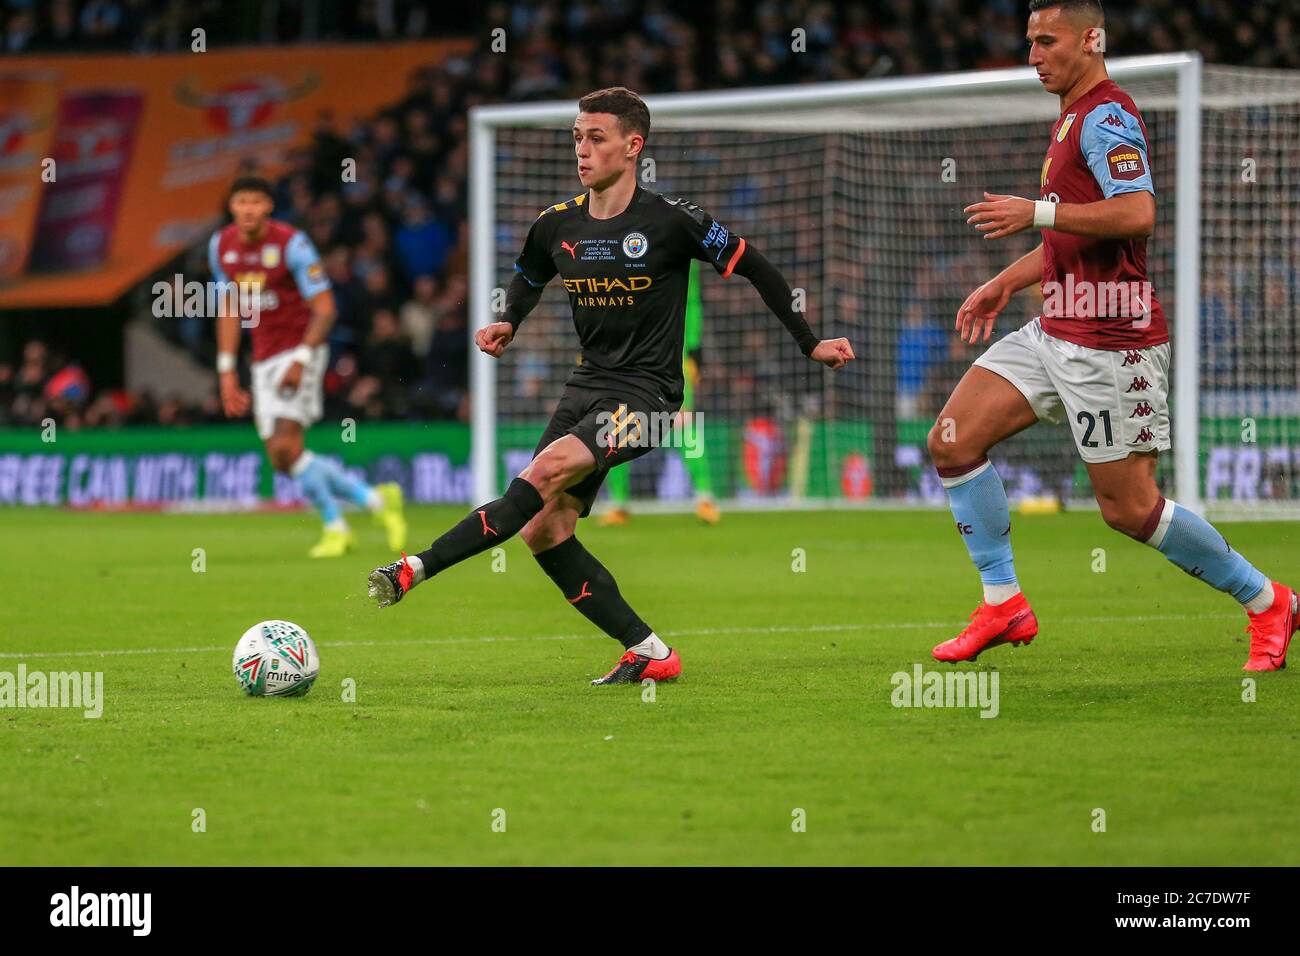 1st March 2020, Wembley Stadium, London, England; Carabao Cup Final, Aston Villa v Manchester City : Phil Foden (47) of Manchester City plays the ball Stock Photo